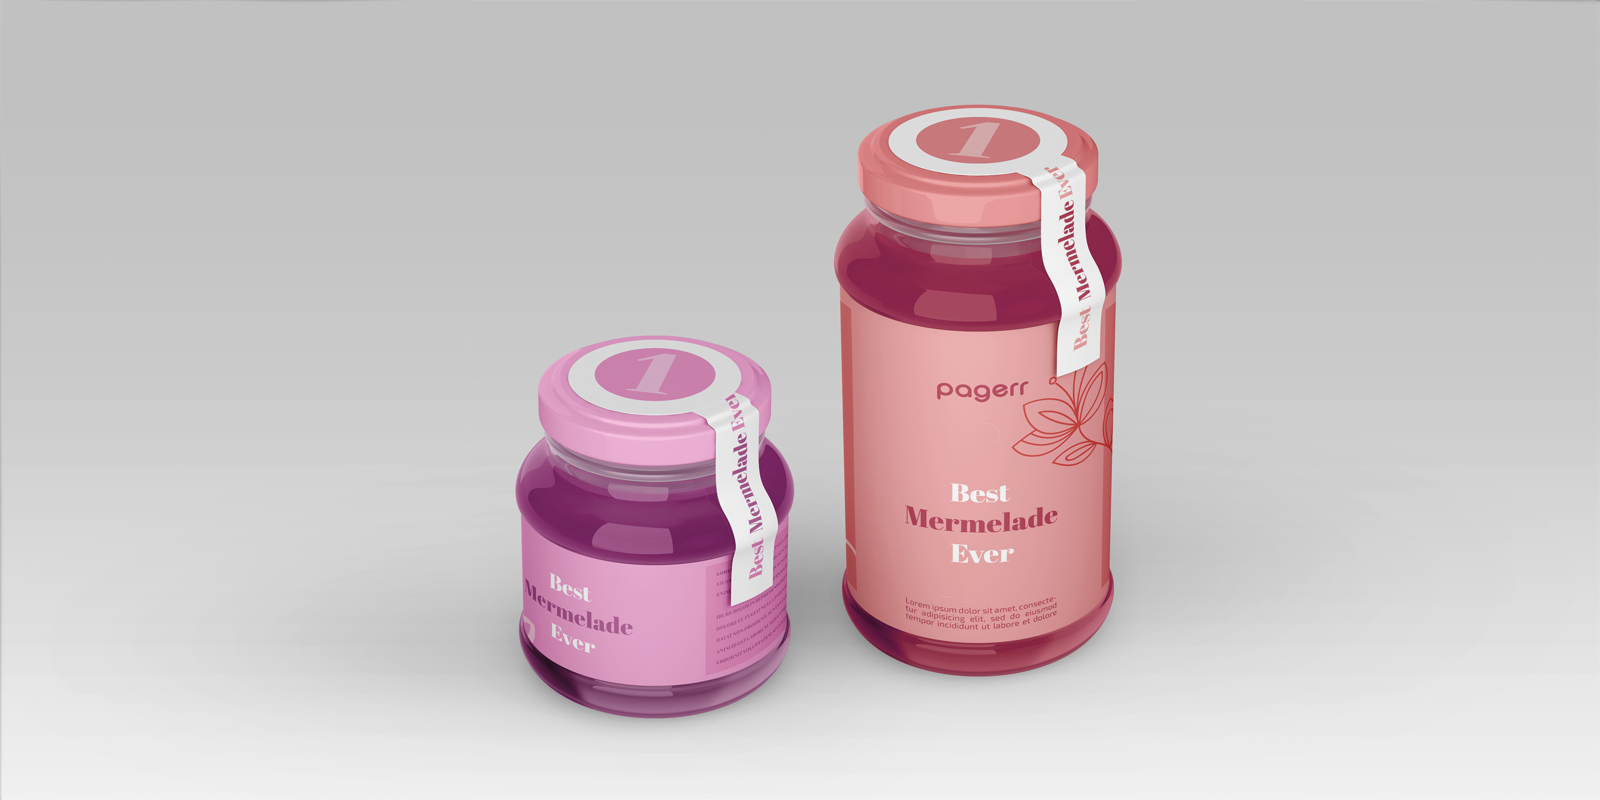 Canning labels in Newcastle - Print with Pagerr